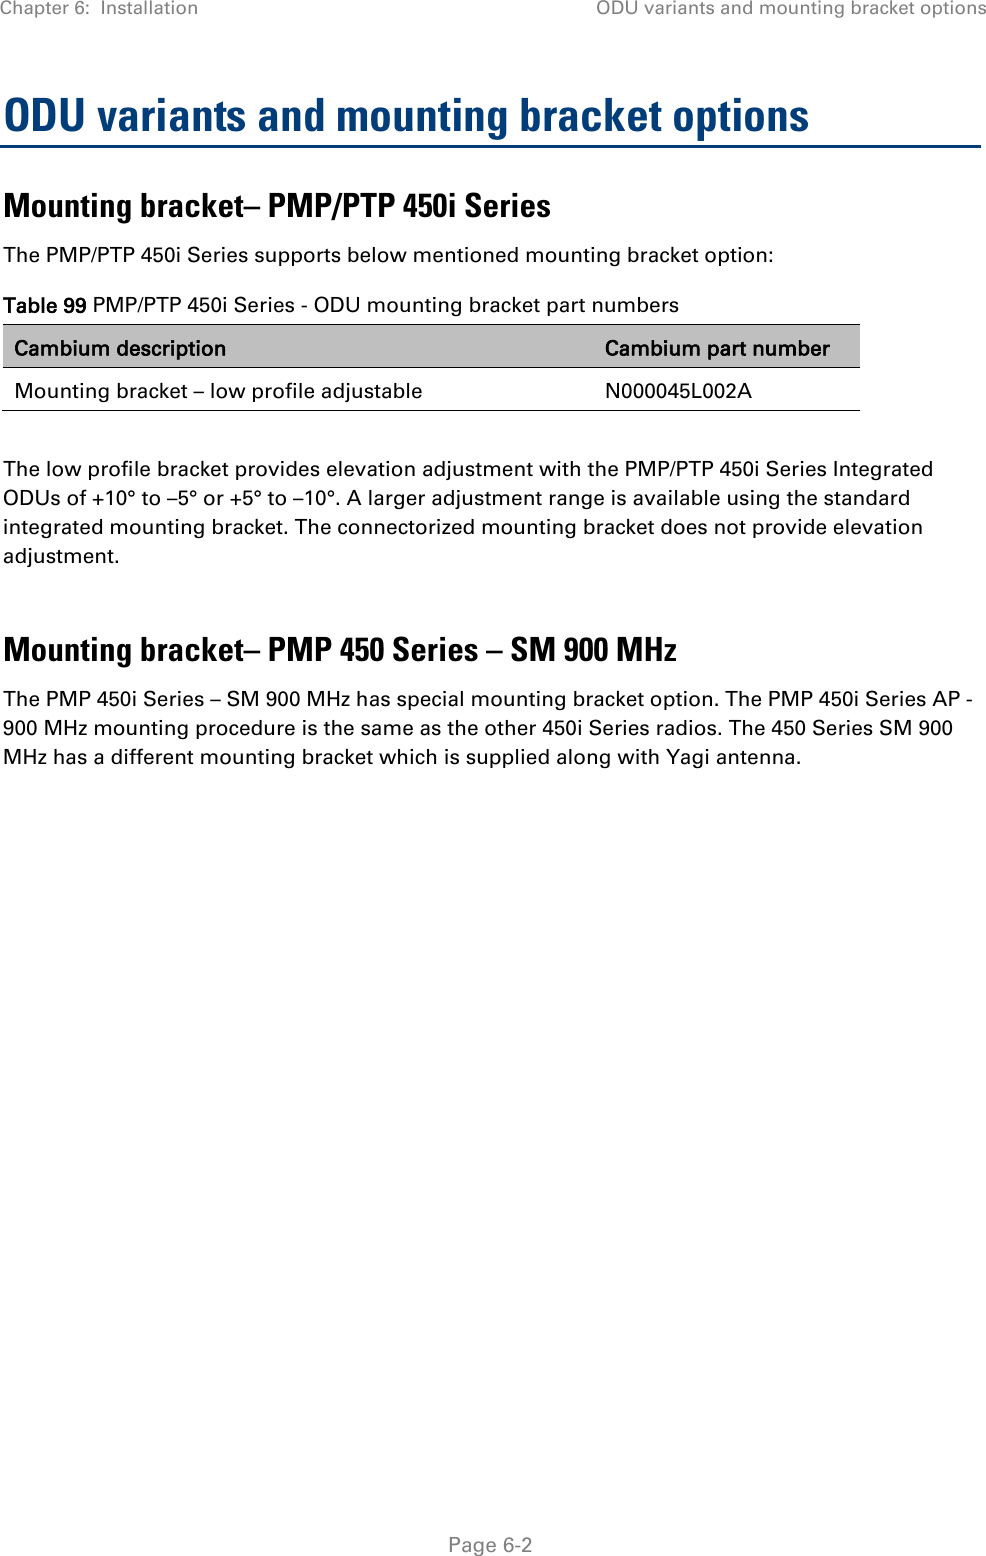 Chapter 6:  Installation ODU variants and mounting bracket options   Page 6-2 ODU variants and mounting bracket options Mounting bracket– PMP/PTP 450i Series  The PMP/PTP 450i Series supports below mentioned mounting bracket option: Table 99 PMP/PTP 450i Series - ODU mounting bracket part numbers Cambium description Cambium part number Mounting bracket – low profile adjustable N000045L002A  The low profile bracket provides elevation adjustment with the PMP/PTP 450i Series Integrated ODUs of +10° to –5° or +5° to –10°. A larger adjustment range is available using the standard integrated mounting bracket. The connectorized mounting bracket does not provide elevation adjustment.  Mounting bracket– PMP 450 Series – SM 900 MHz The PMP 450i Series – SM 900 MHz has special mounting bracket option. The PMP 450i Series AP - 900 MHz mounting procedure is the same as the other 450i Series radios. The 450 Series SM 900 MHz has a different mounting bracket which is supplied along with Yagi antenna.  